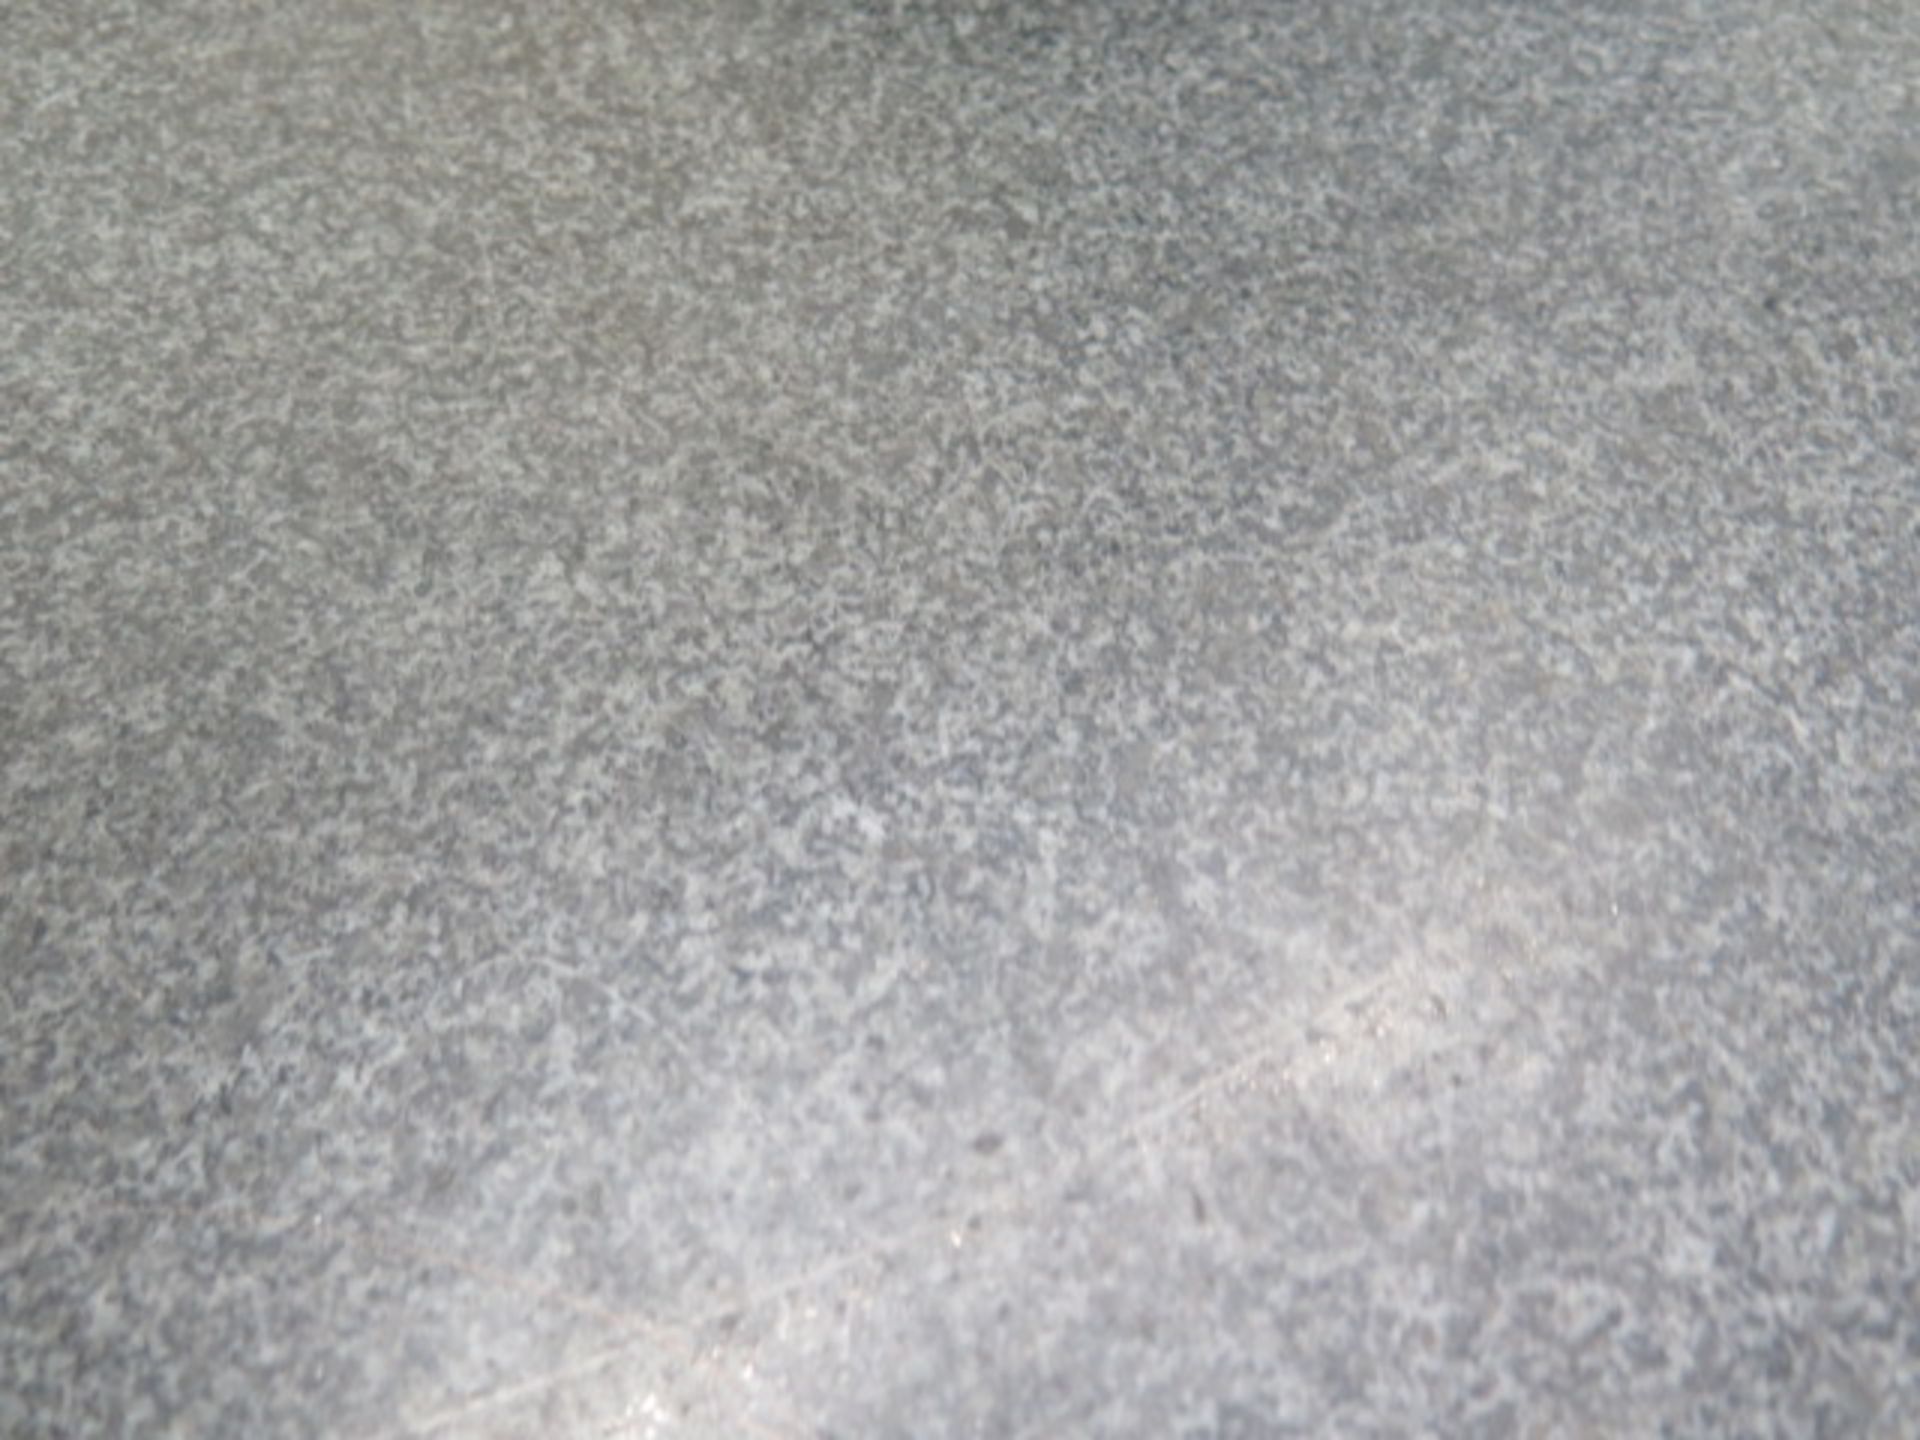 Mojave 36” x 72” x 8” Grade “A” Granite Surface Plate w/ Stand (SOLD AS-IS - NO WARRANTY) - Image 4 of 5